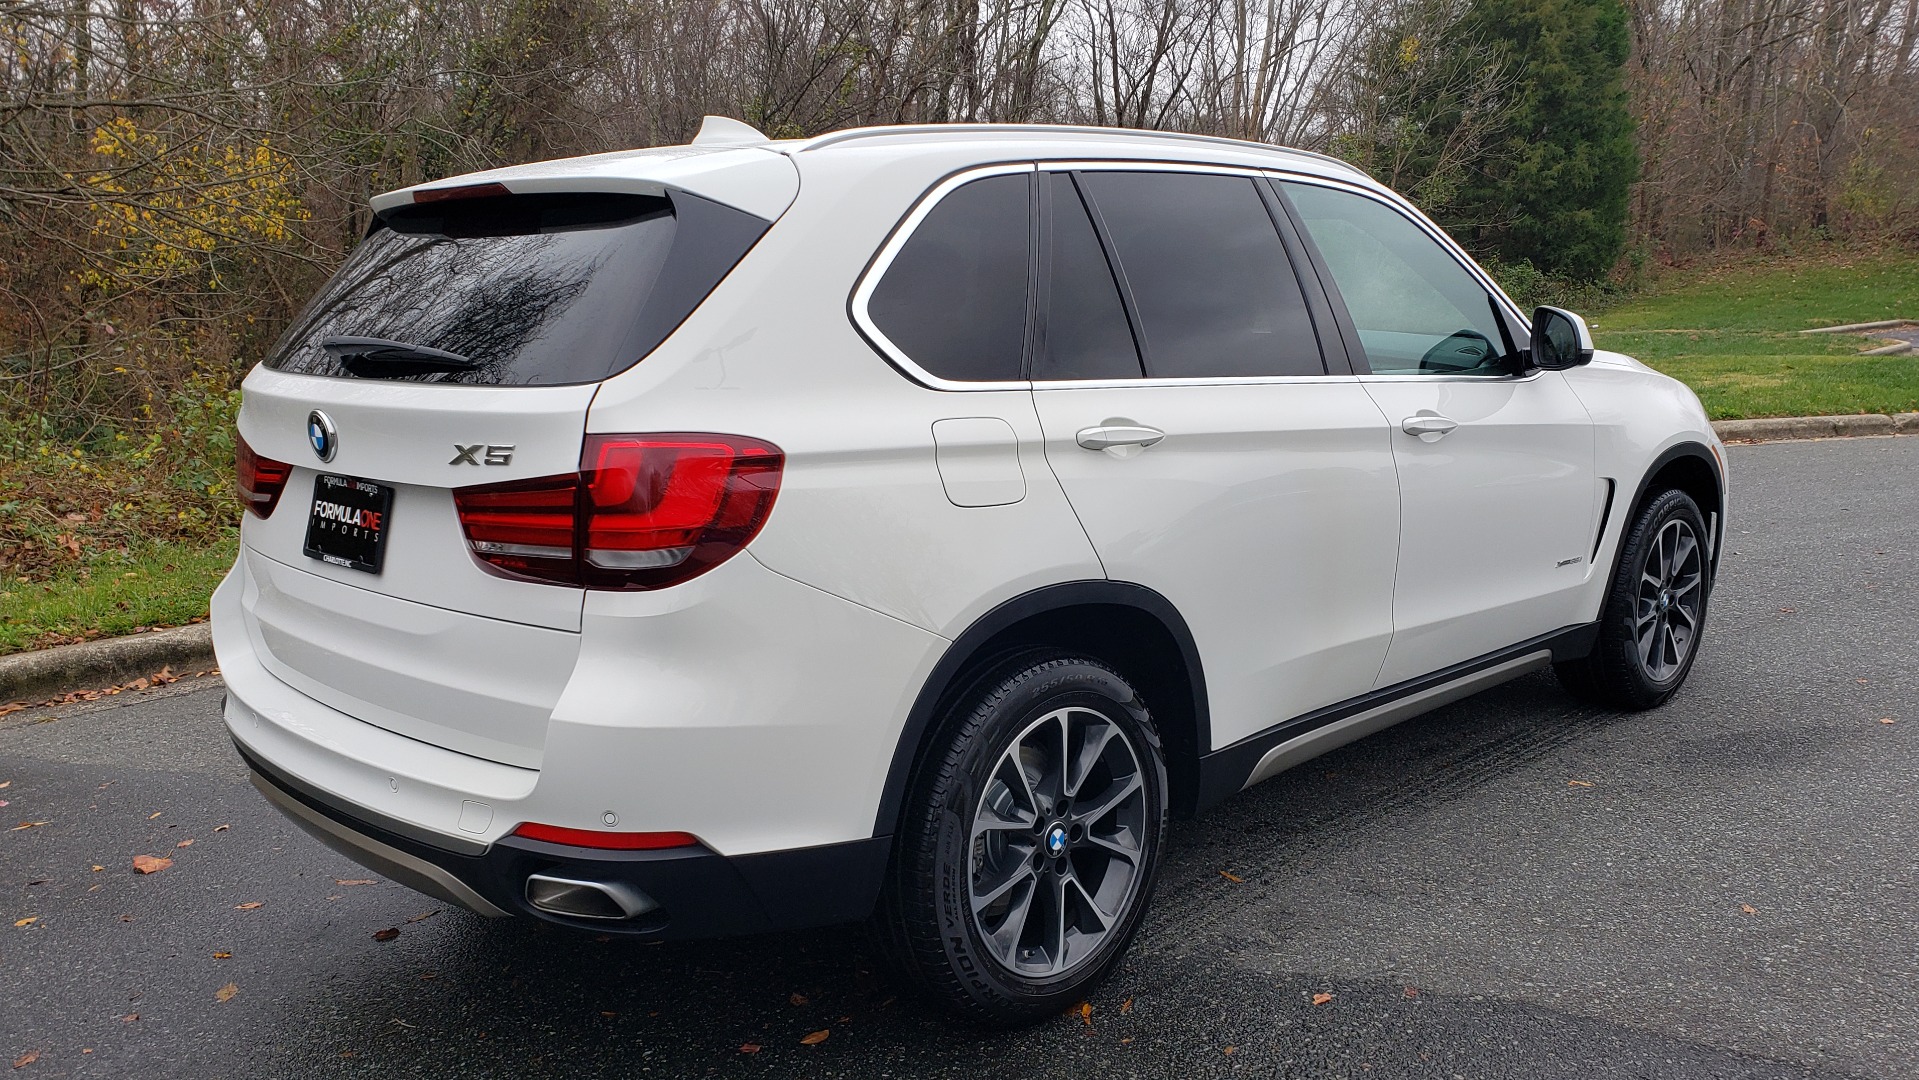 Used 2018 BMW X5 XDRIVE35I / AWD / NAV / HTD STS / SUNROOF / REARVIEW for sale Sold at Formula Imports in Charlotte NC 28227 6